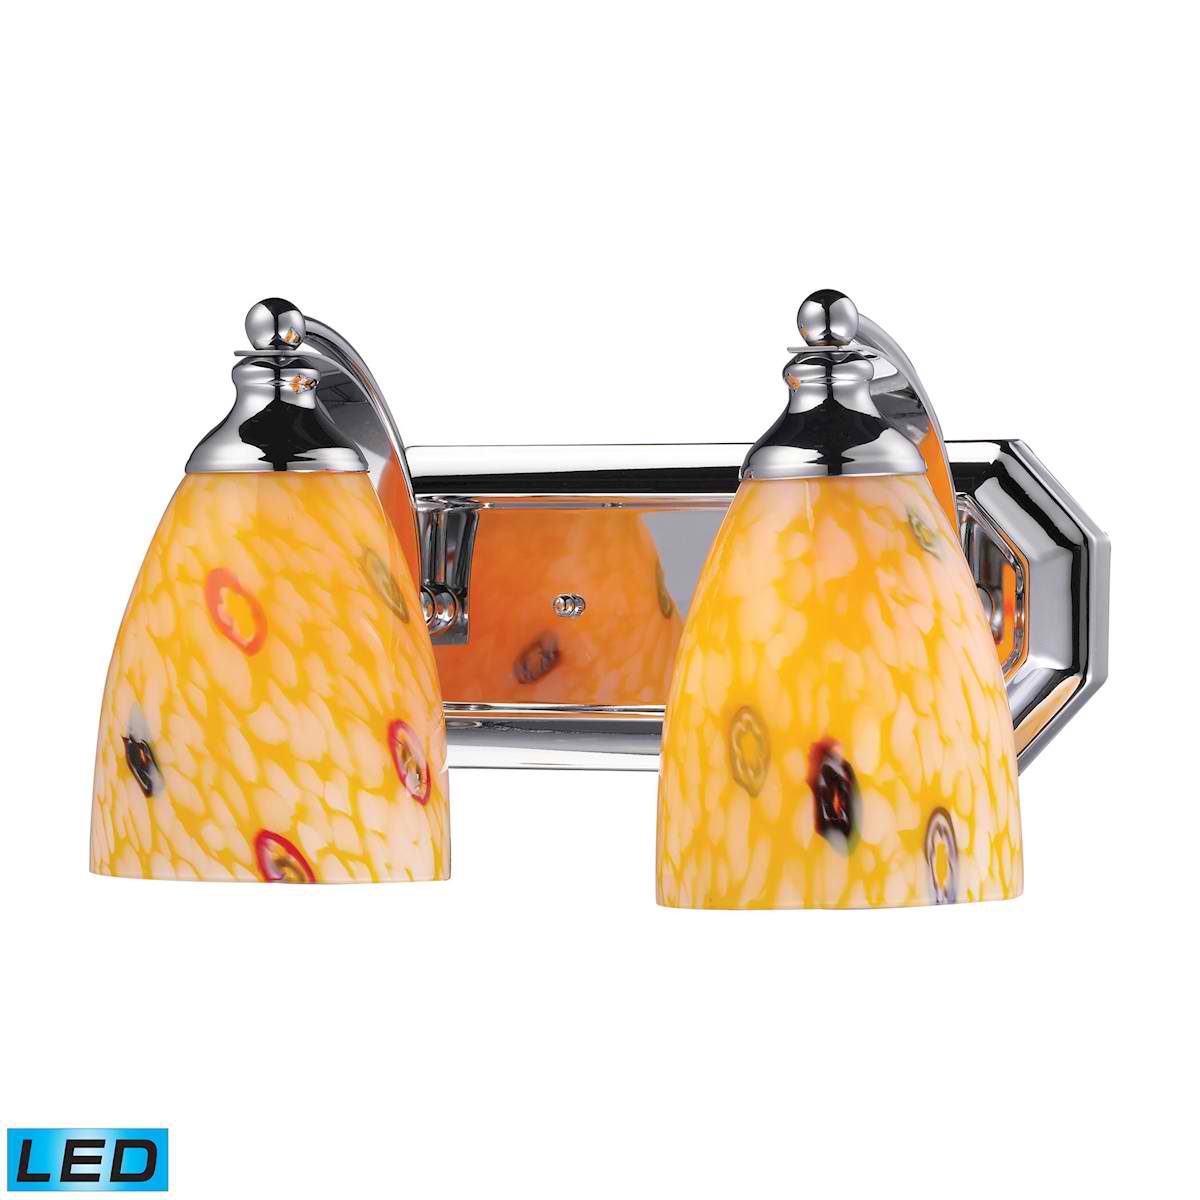 2 Light Vanity in Polished Chrome and Yellow Blaze Glass - LED, 800 Lumens (1600 Lumens Total) With Full Scale